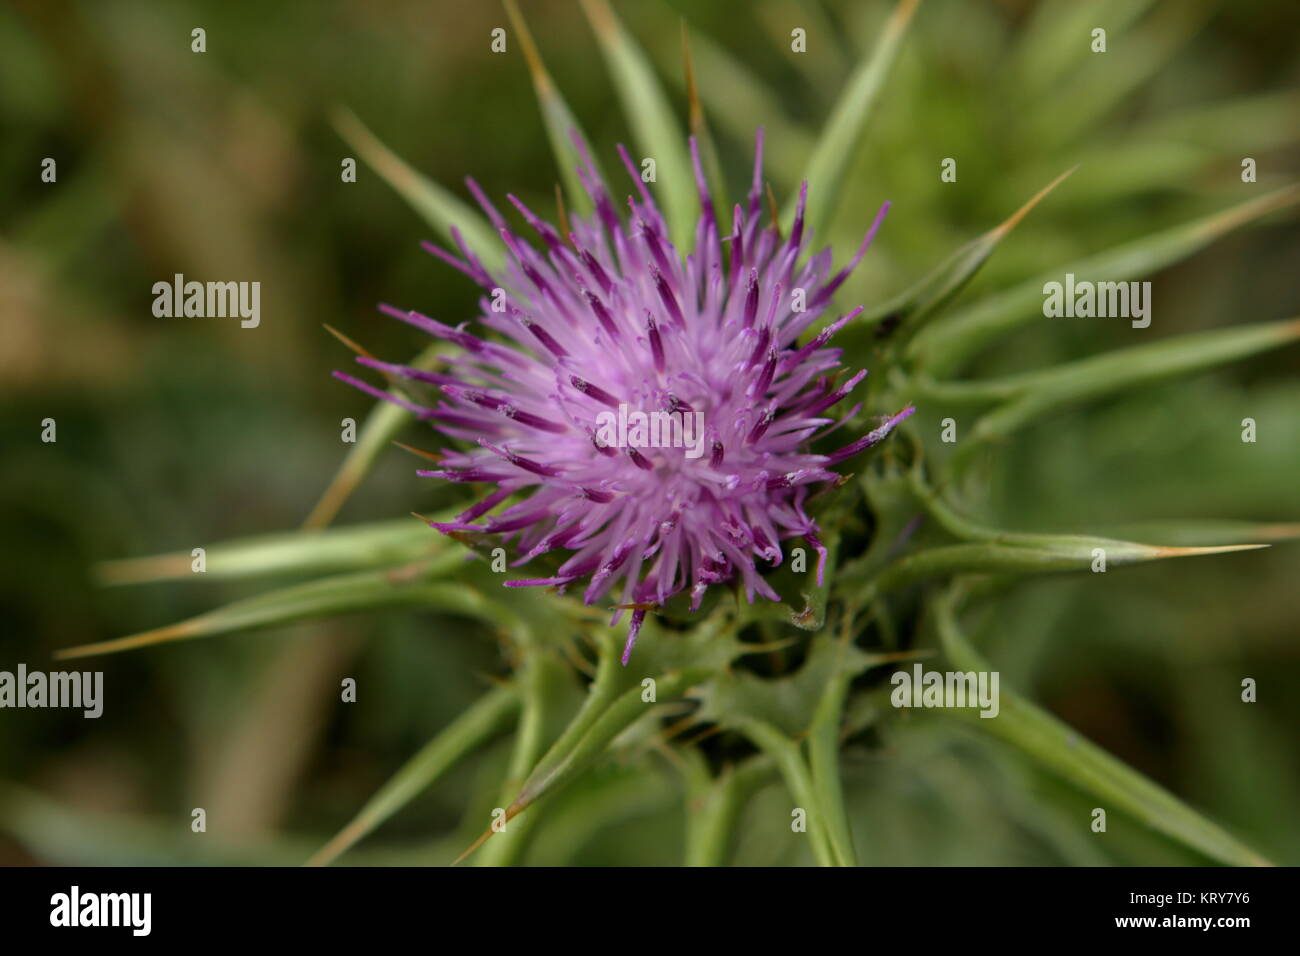 a flowering thistle Stock Photo